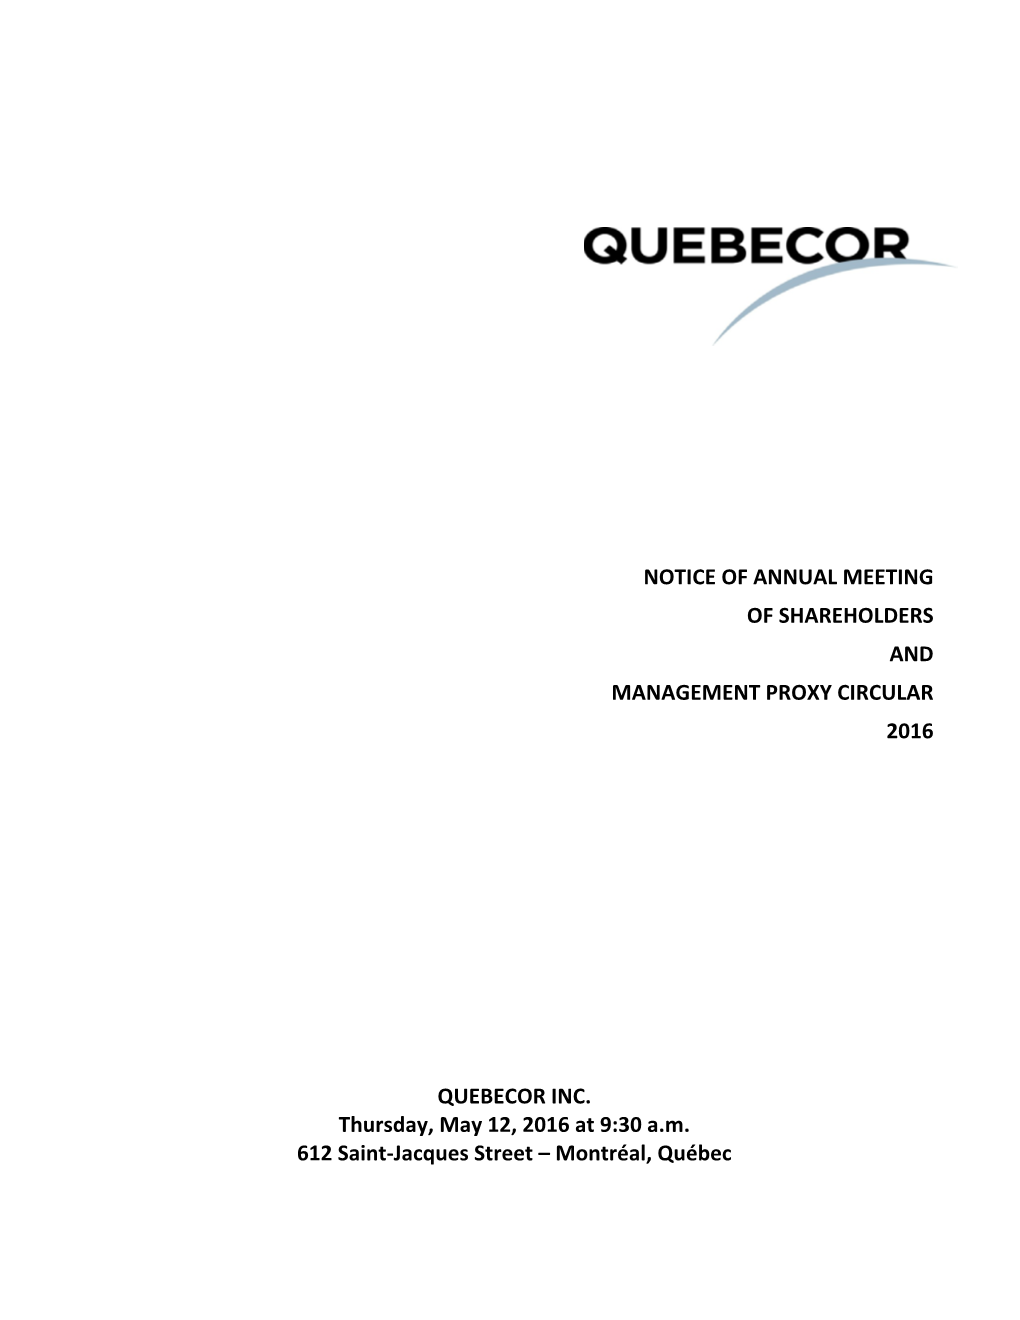 NOTICE of ANNUAL MEETING of SHAREHOLDERS and MANAGEMENT PROXY CIRCULAR 2016 QUEBECOR INC. Thursday, May 12, 2016 at 9:30 A.M. 61